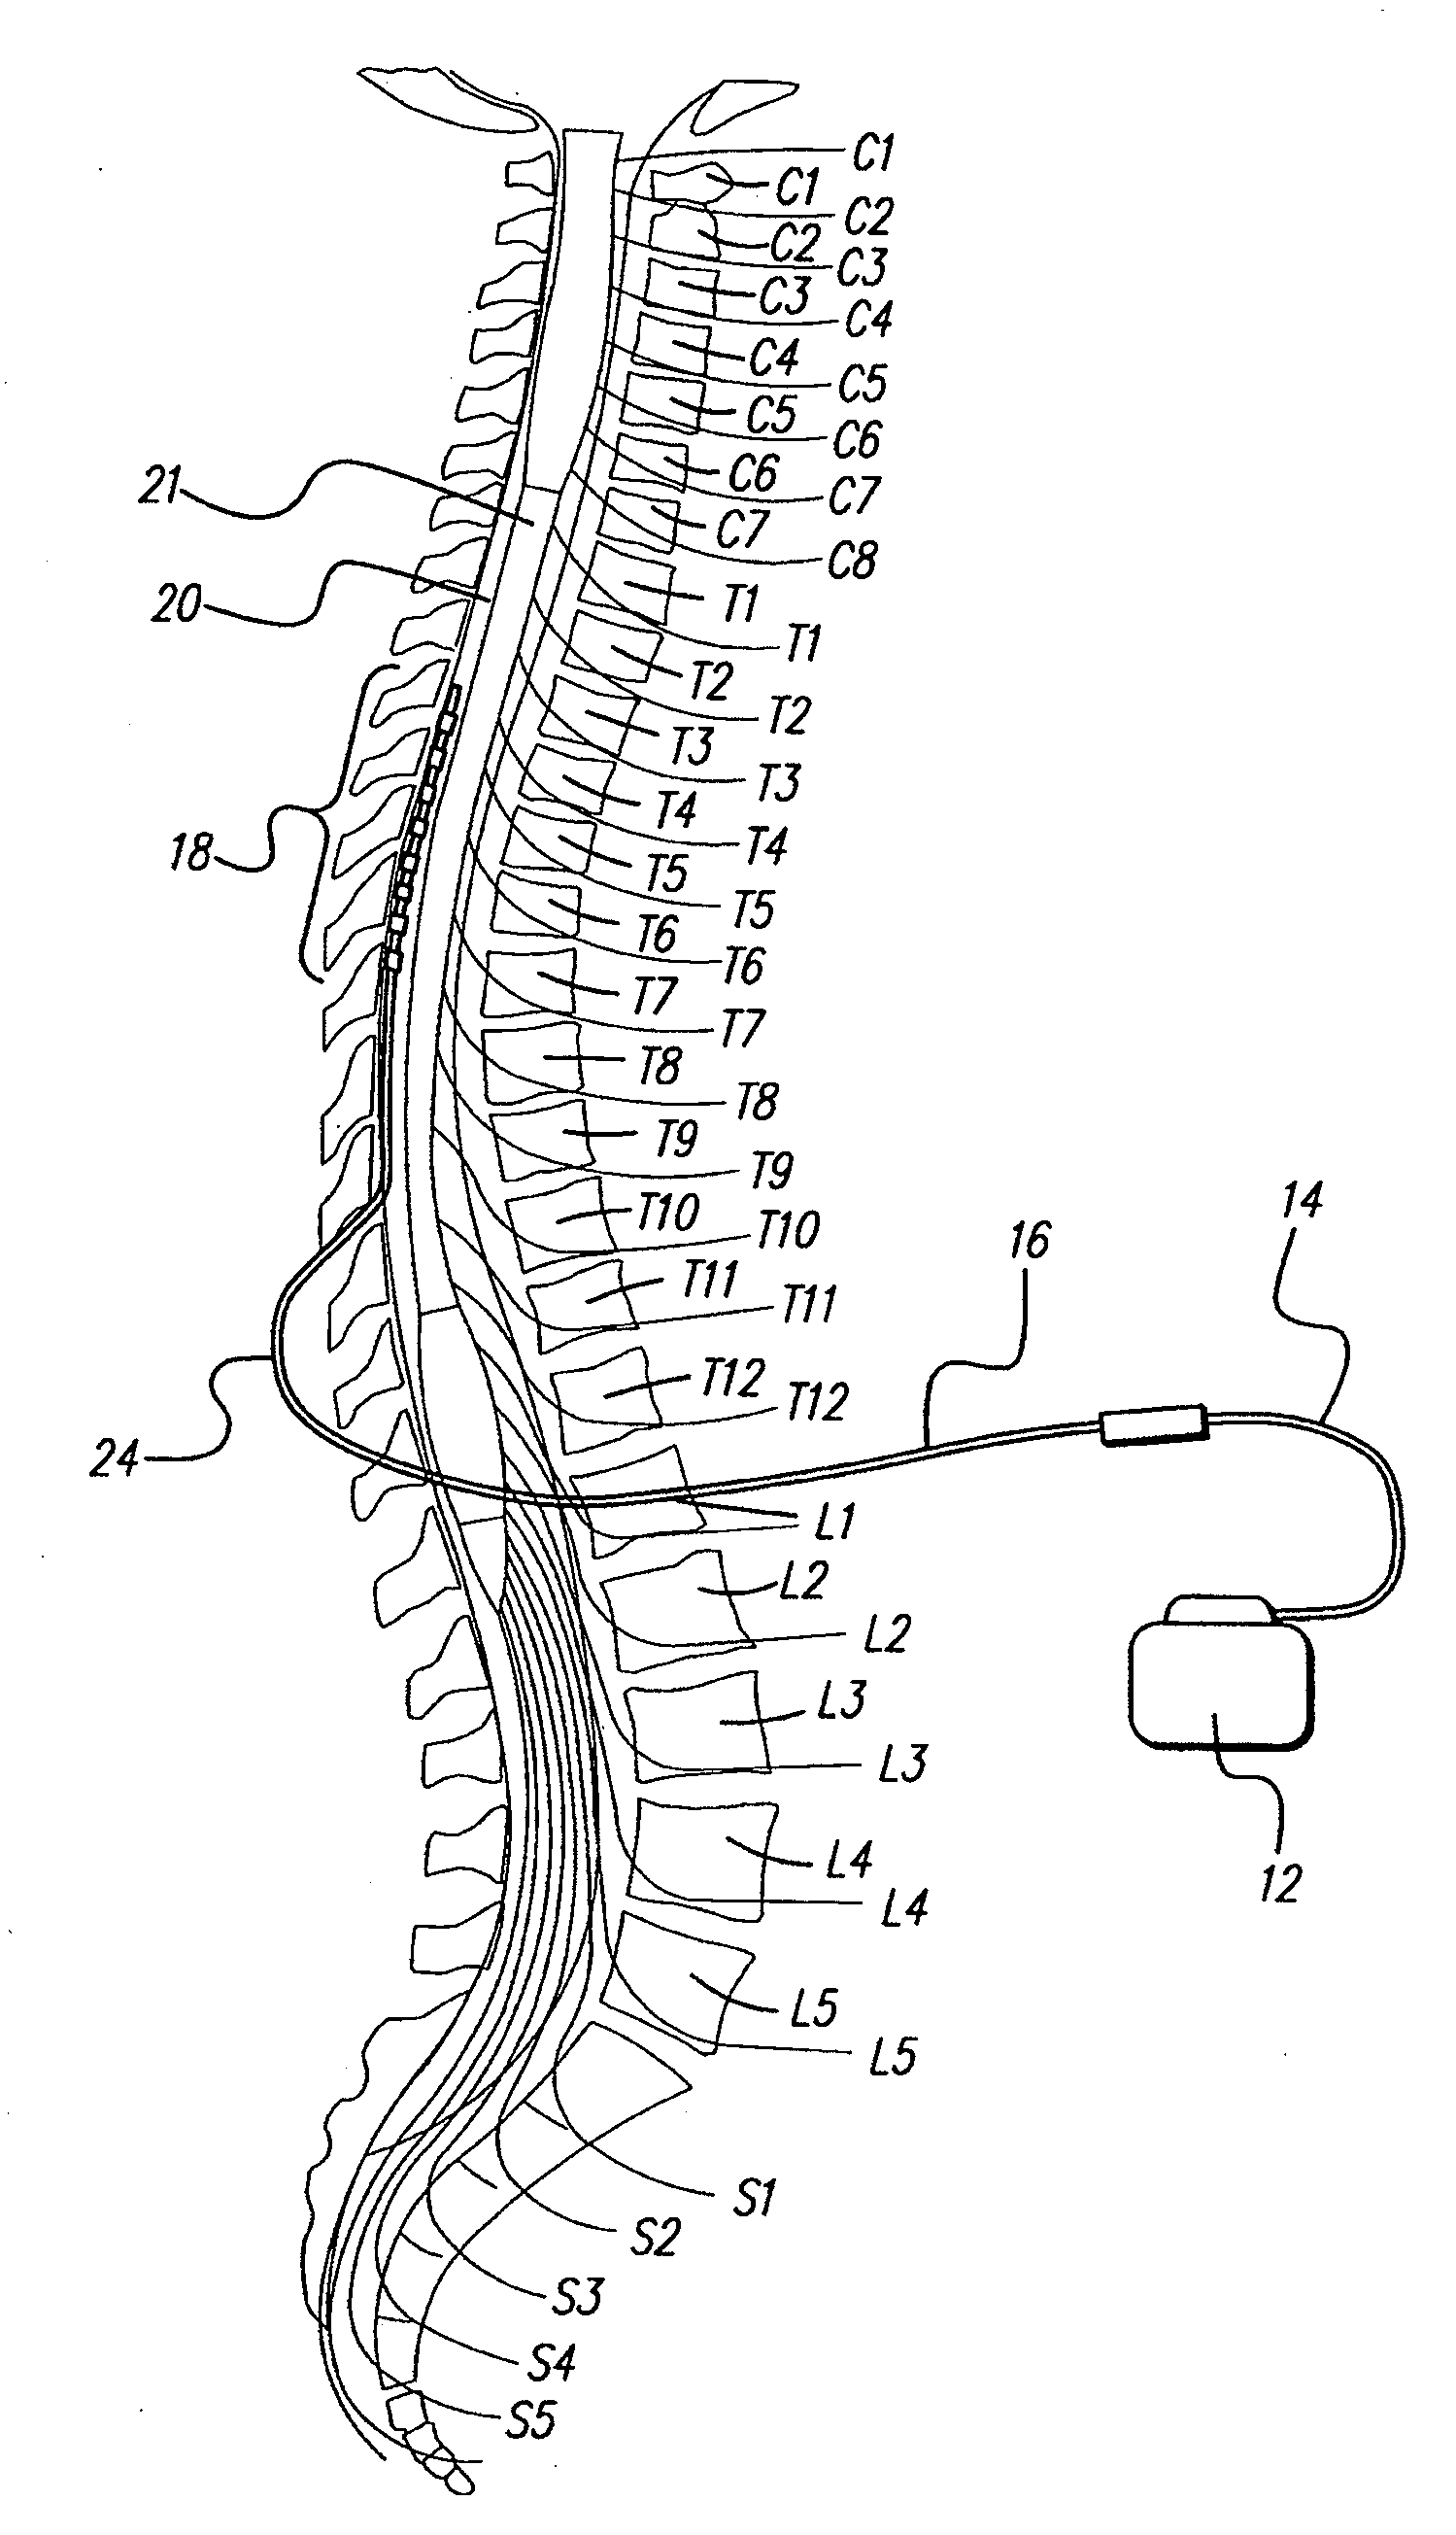 Method for optimizing search for spinal cord stimulation parameter settings